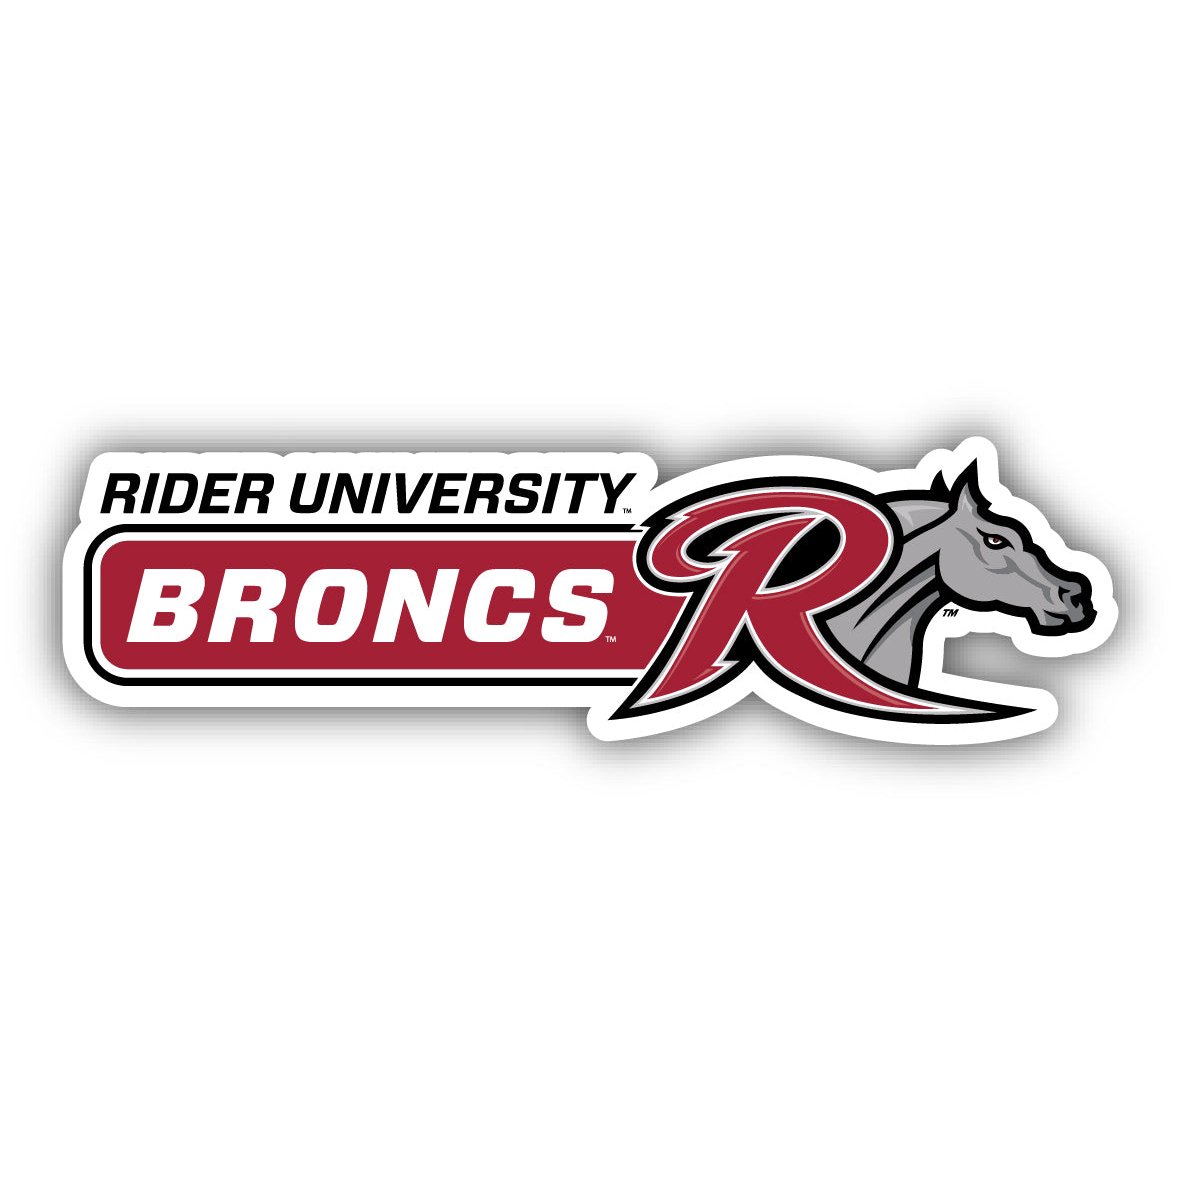 Rider University Broncs 4 Inch Wide Colorful Vinyl Decal Sticker